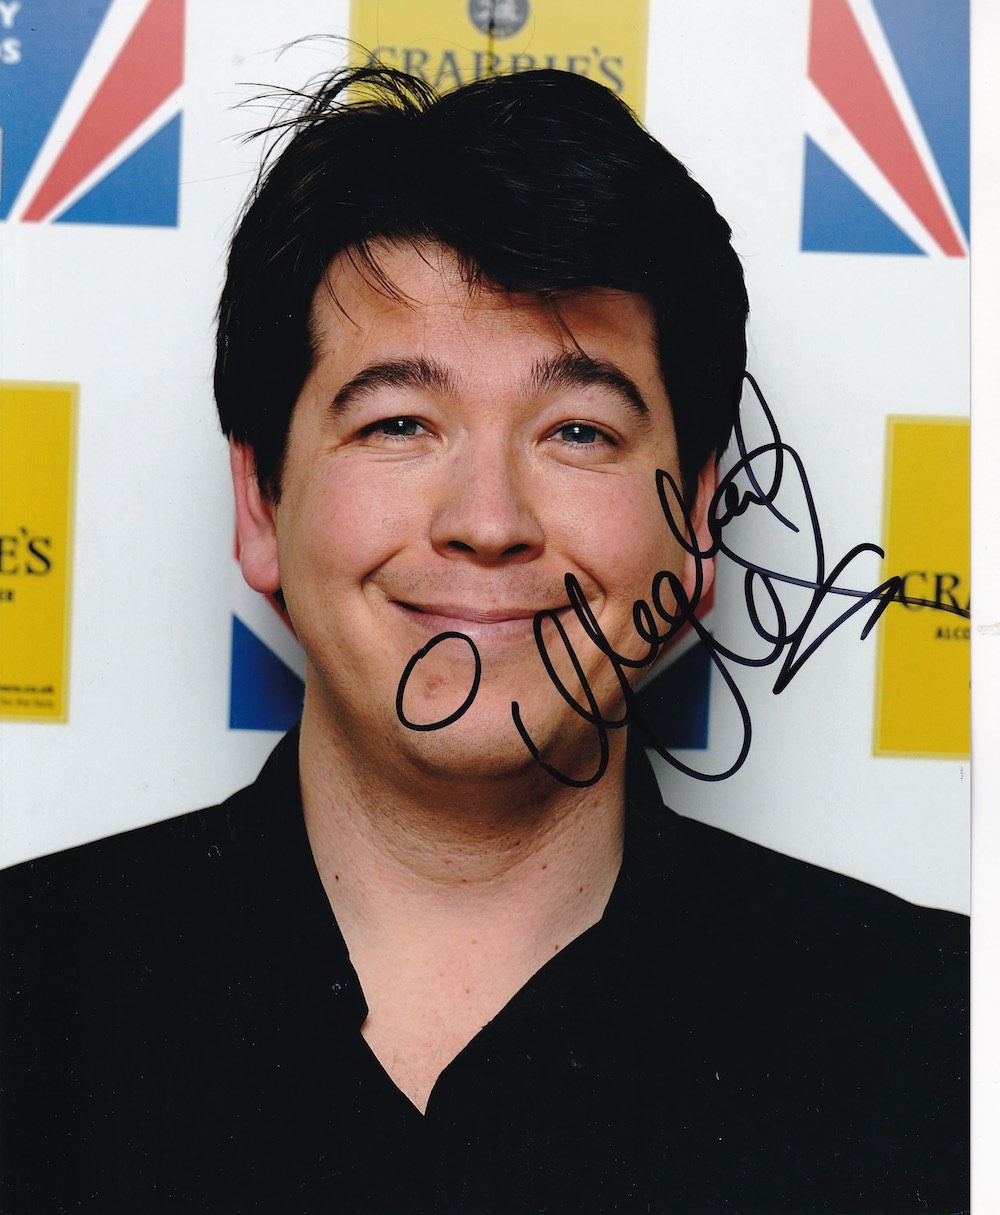 Michael McIntyre Comedian and TV Show Host 10x8 inch Signed Photo. Good Condition. All autographs